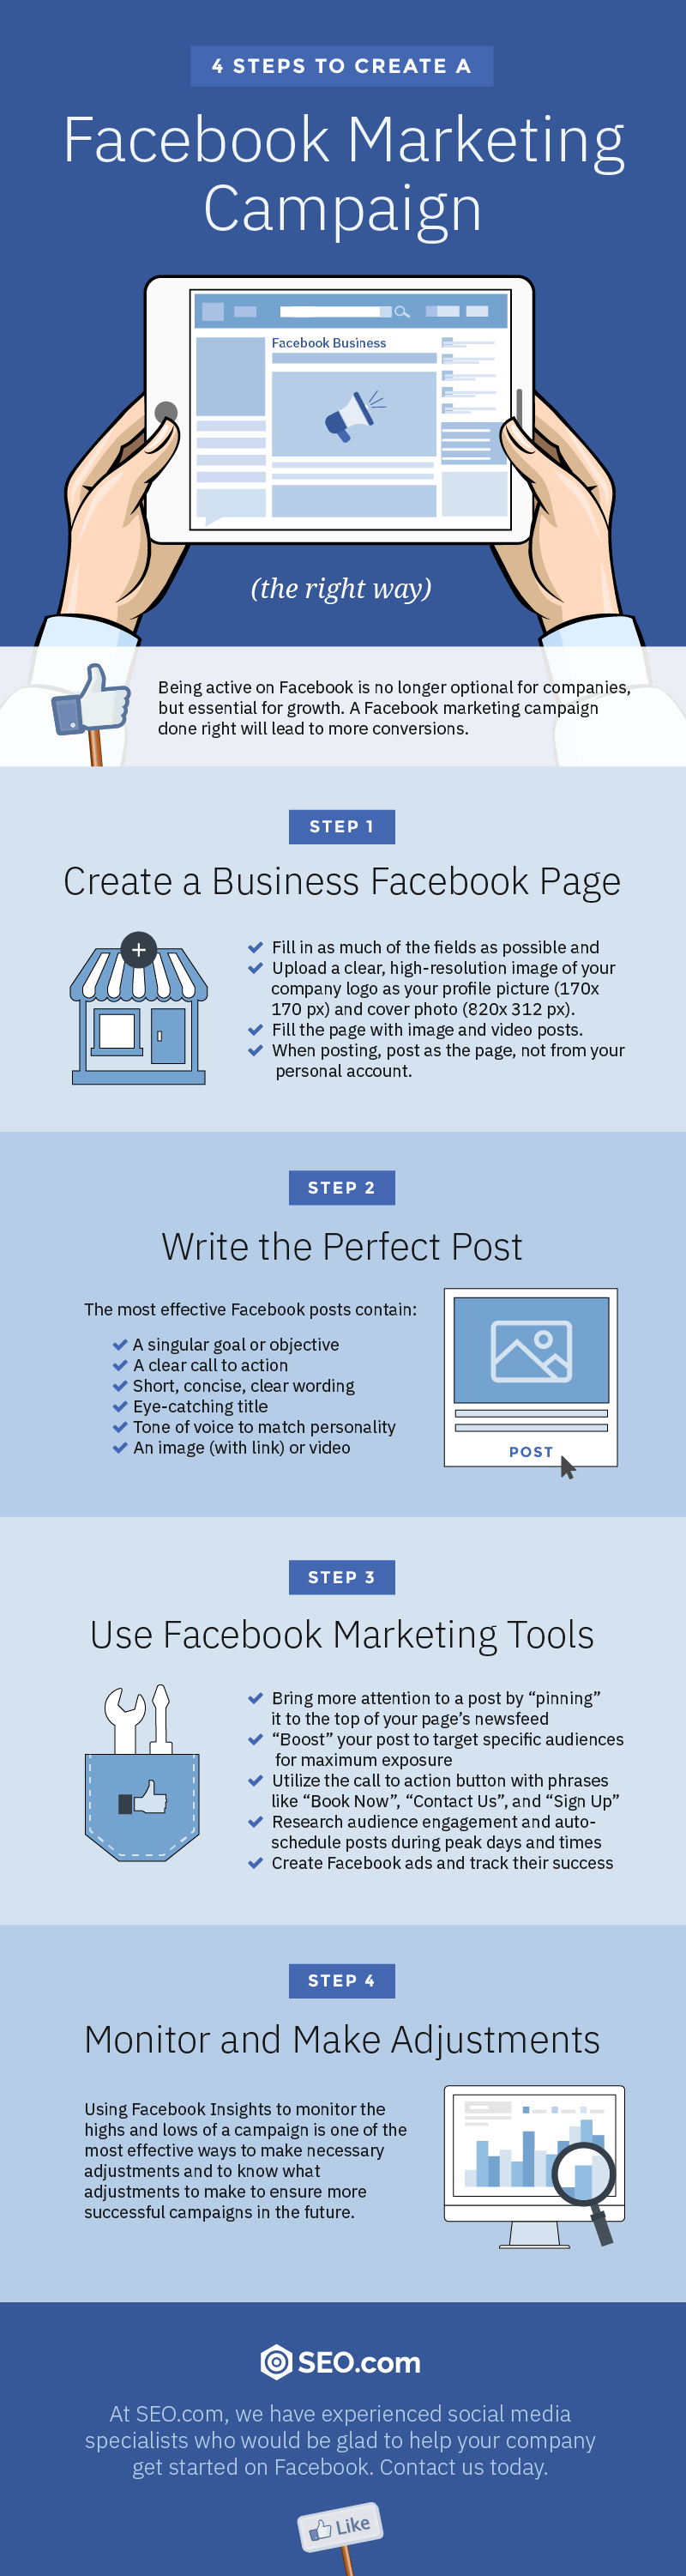 4 Step Guide To An Awesome Facebook Marketing Campaign